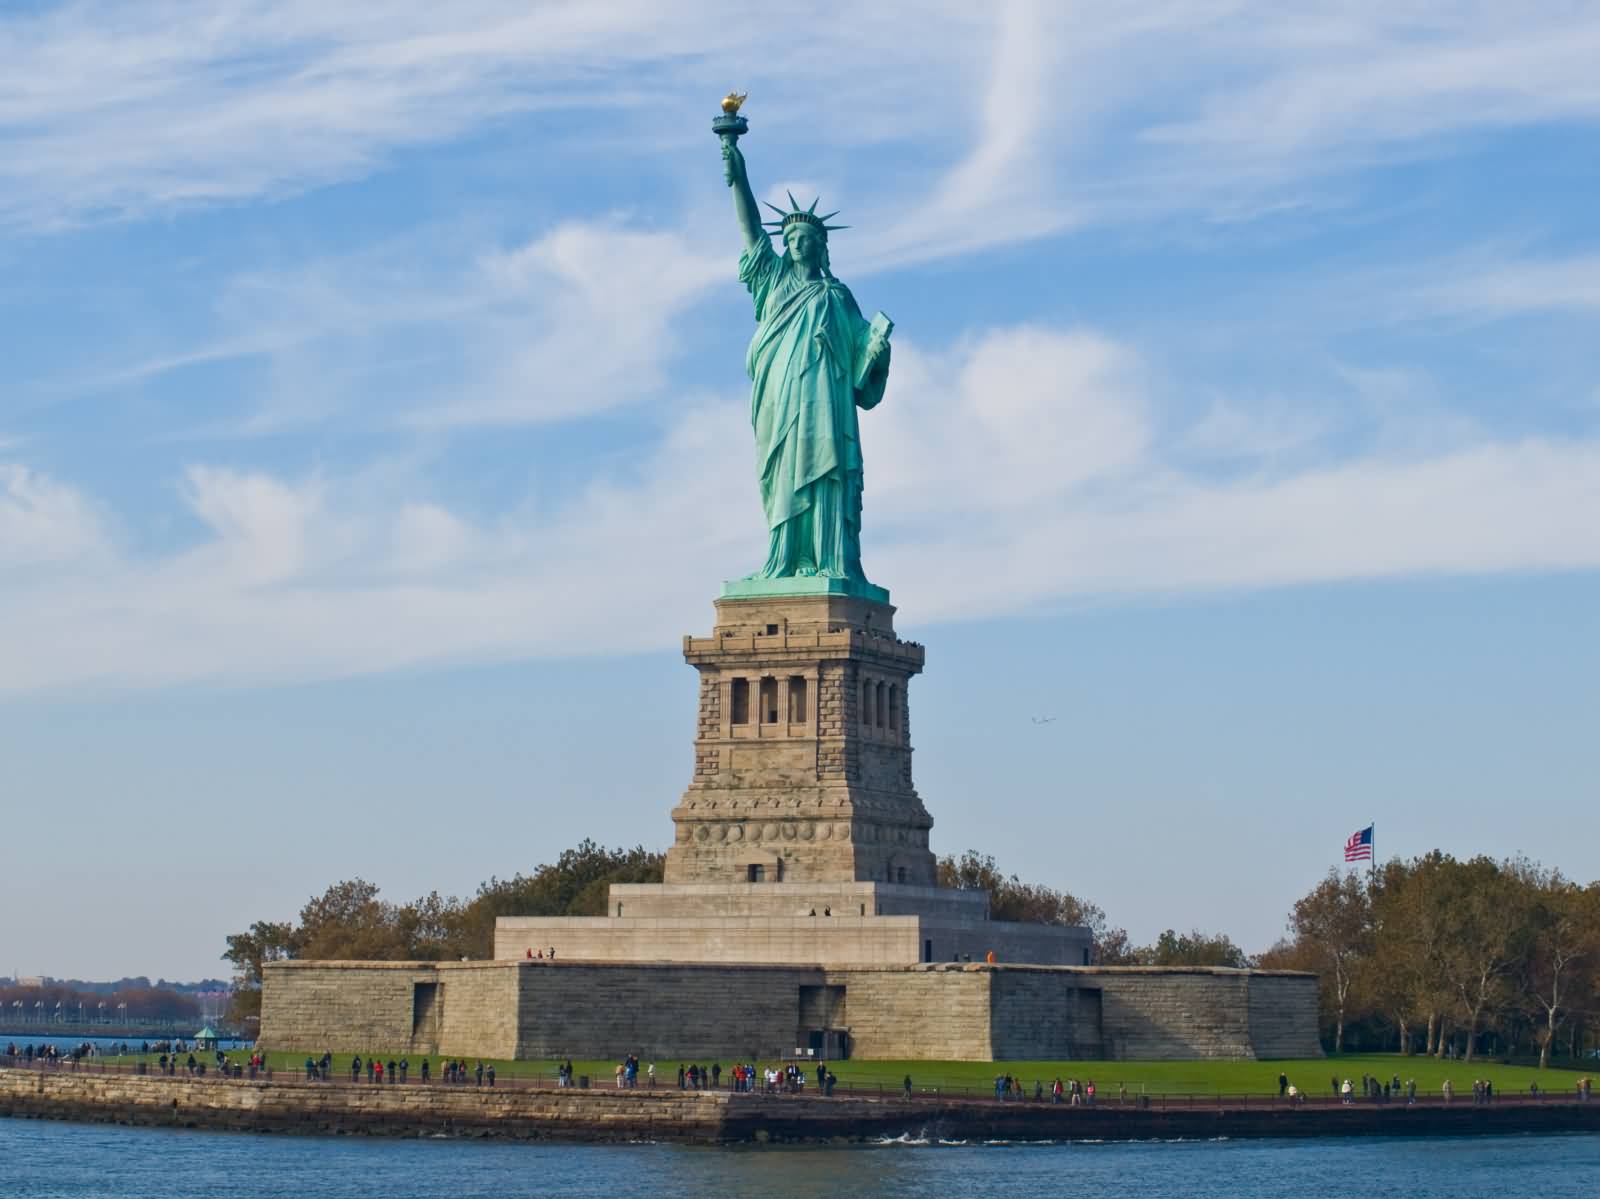 Statue of Liberty On The Bank Of Hudson River